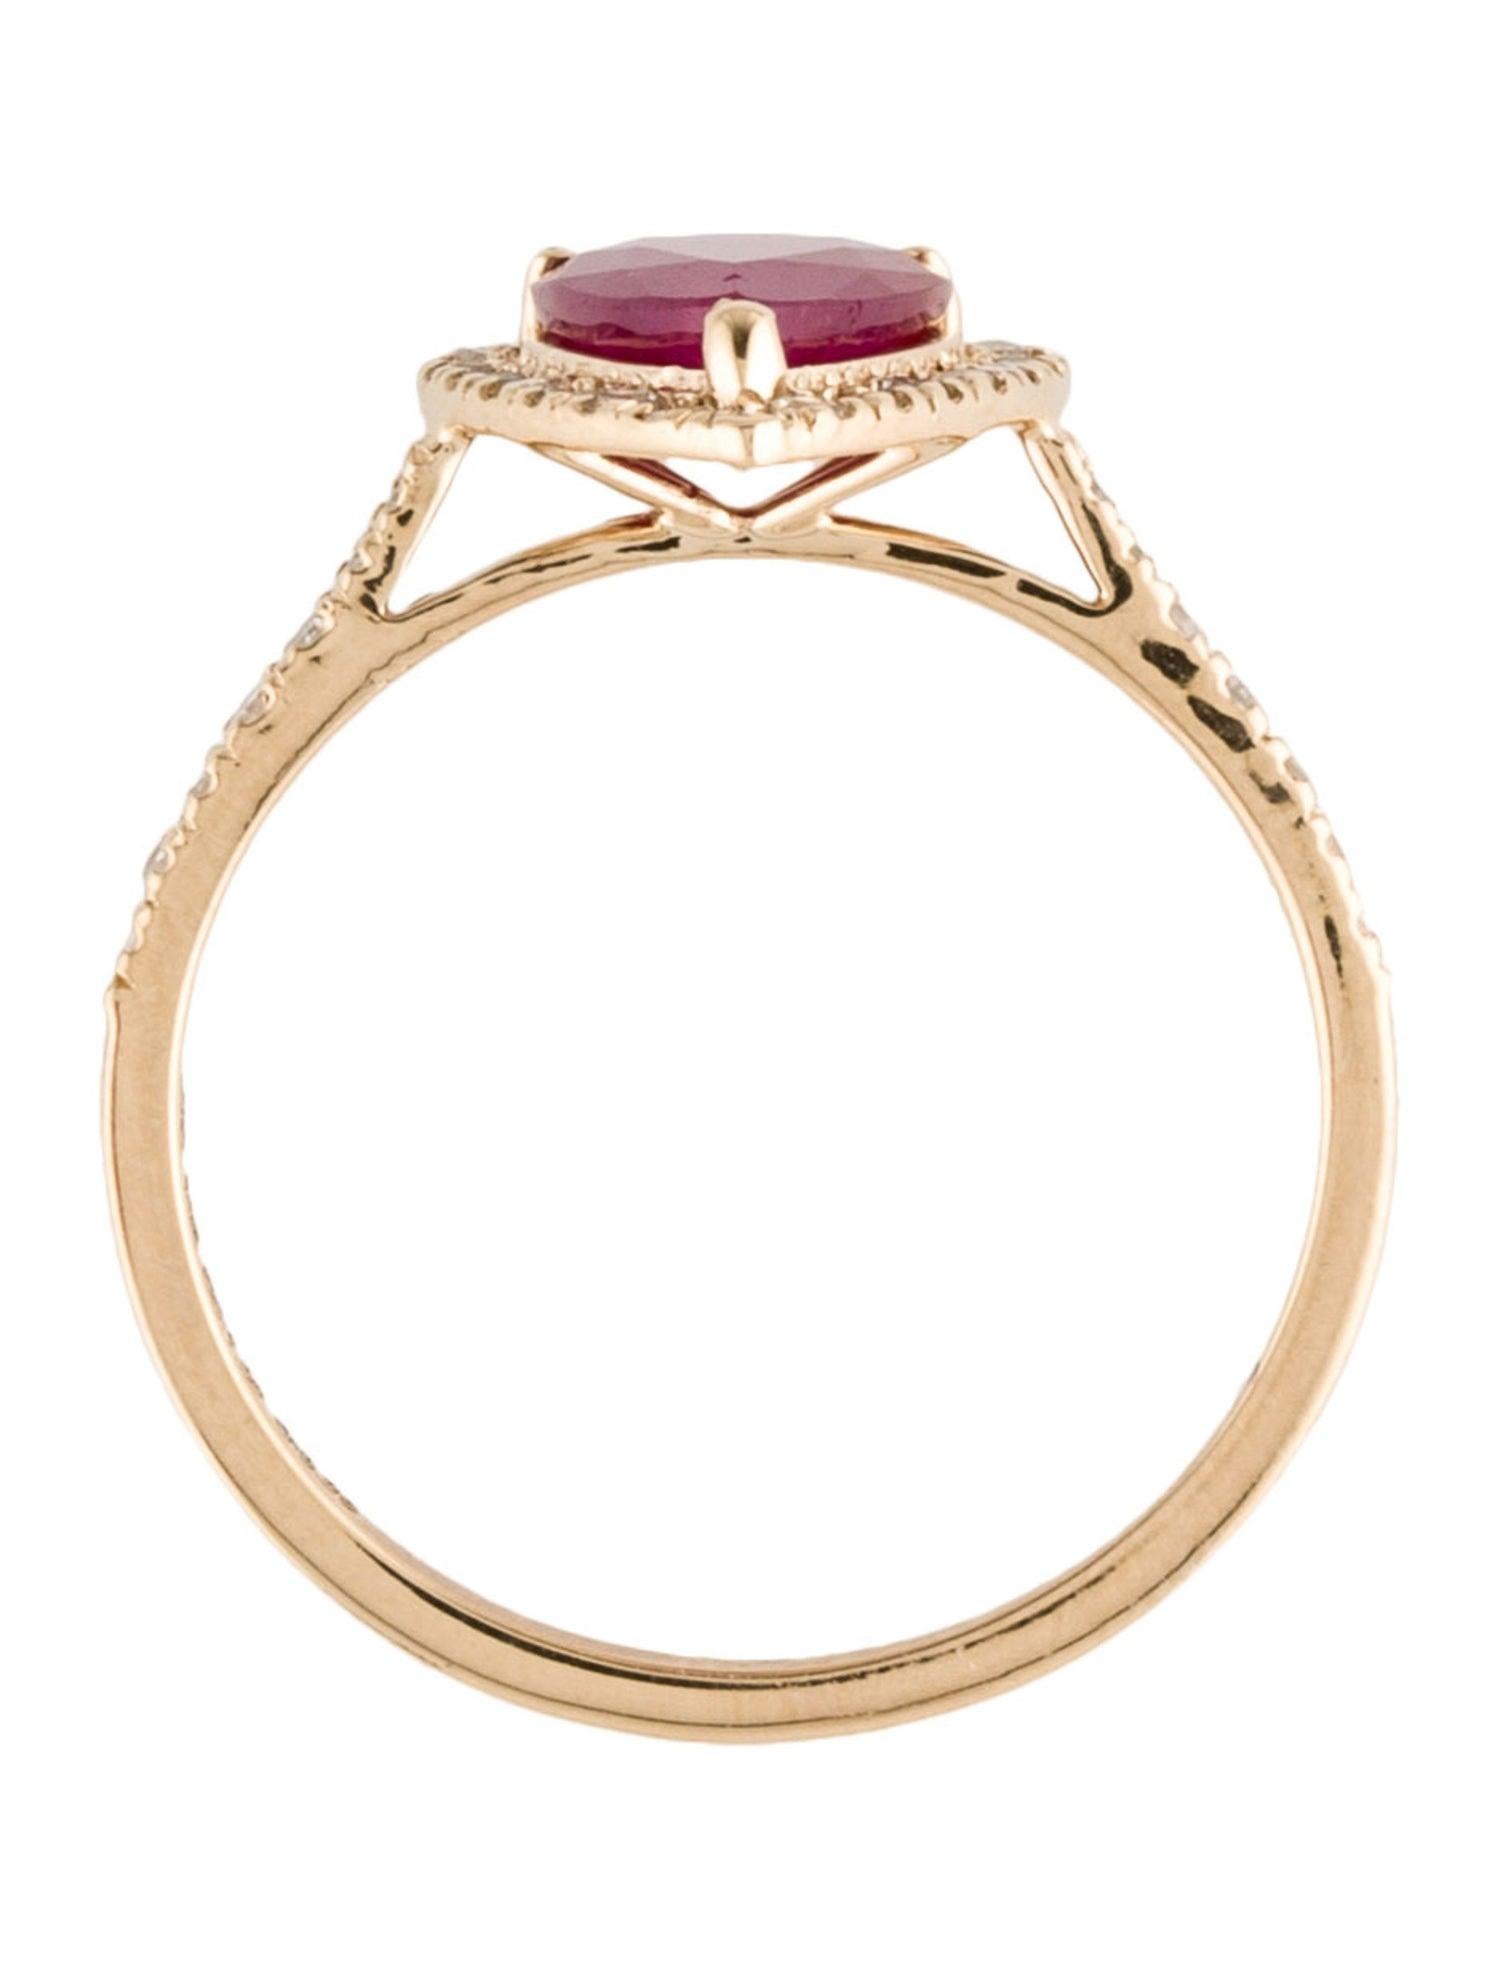 Luxury 14K Ruby & Diamond Cocktail Ring 1.58ctw - Size 6.75 - Timeless & Elegant In New Condition For Sale In Holtsville, NY